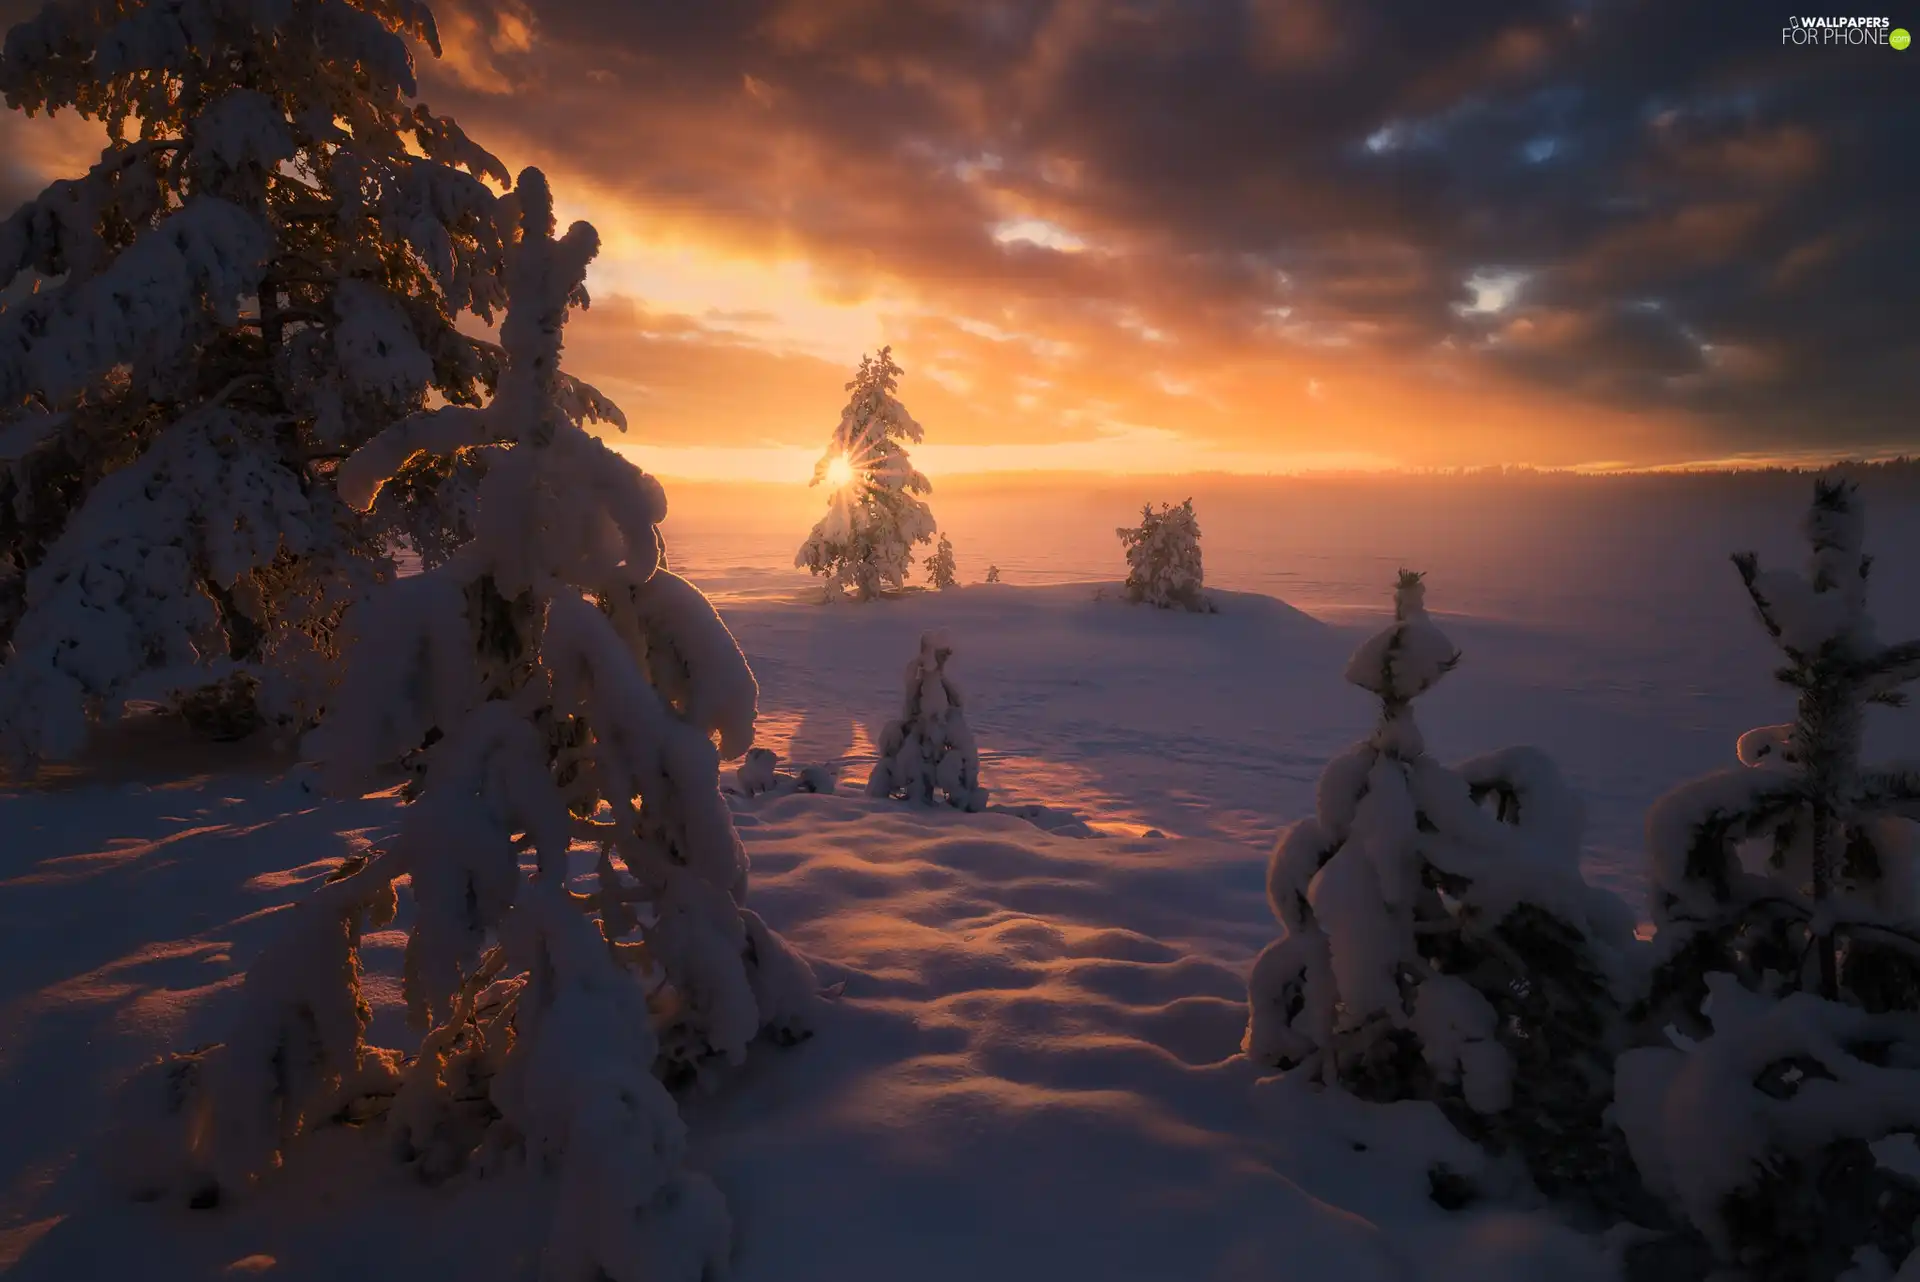 Great Sunsets, winter, viewes, snowy, trees, Ringerike Municipality, Norway, lake